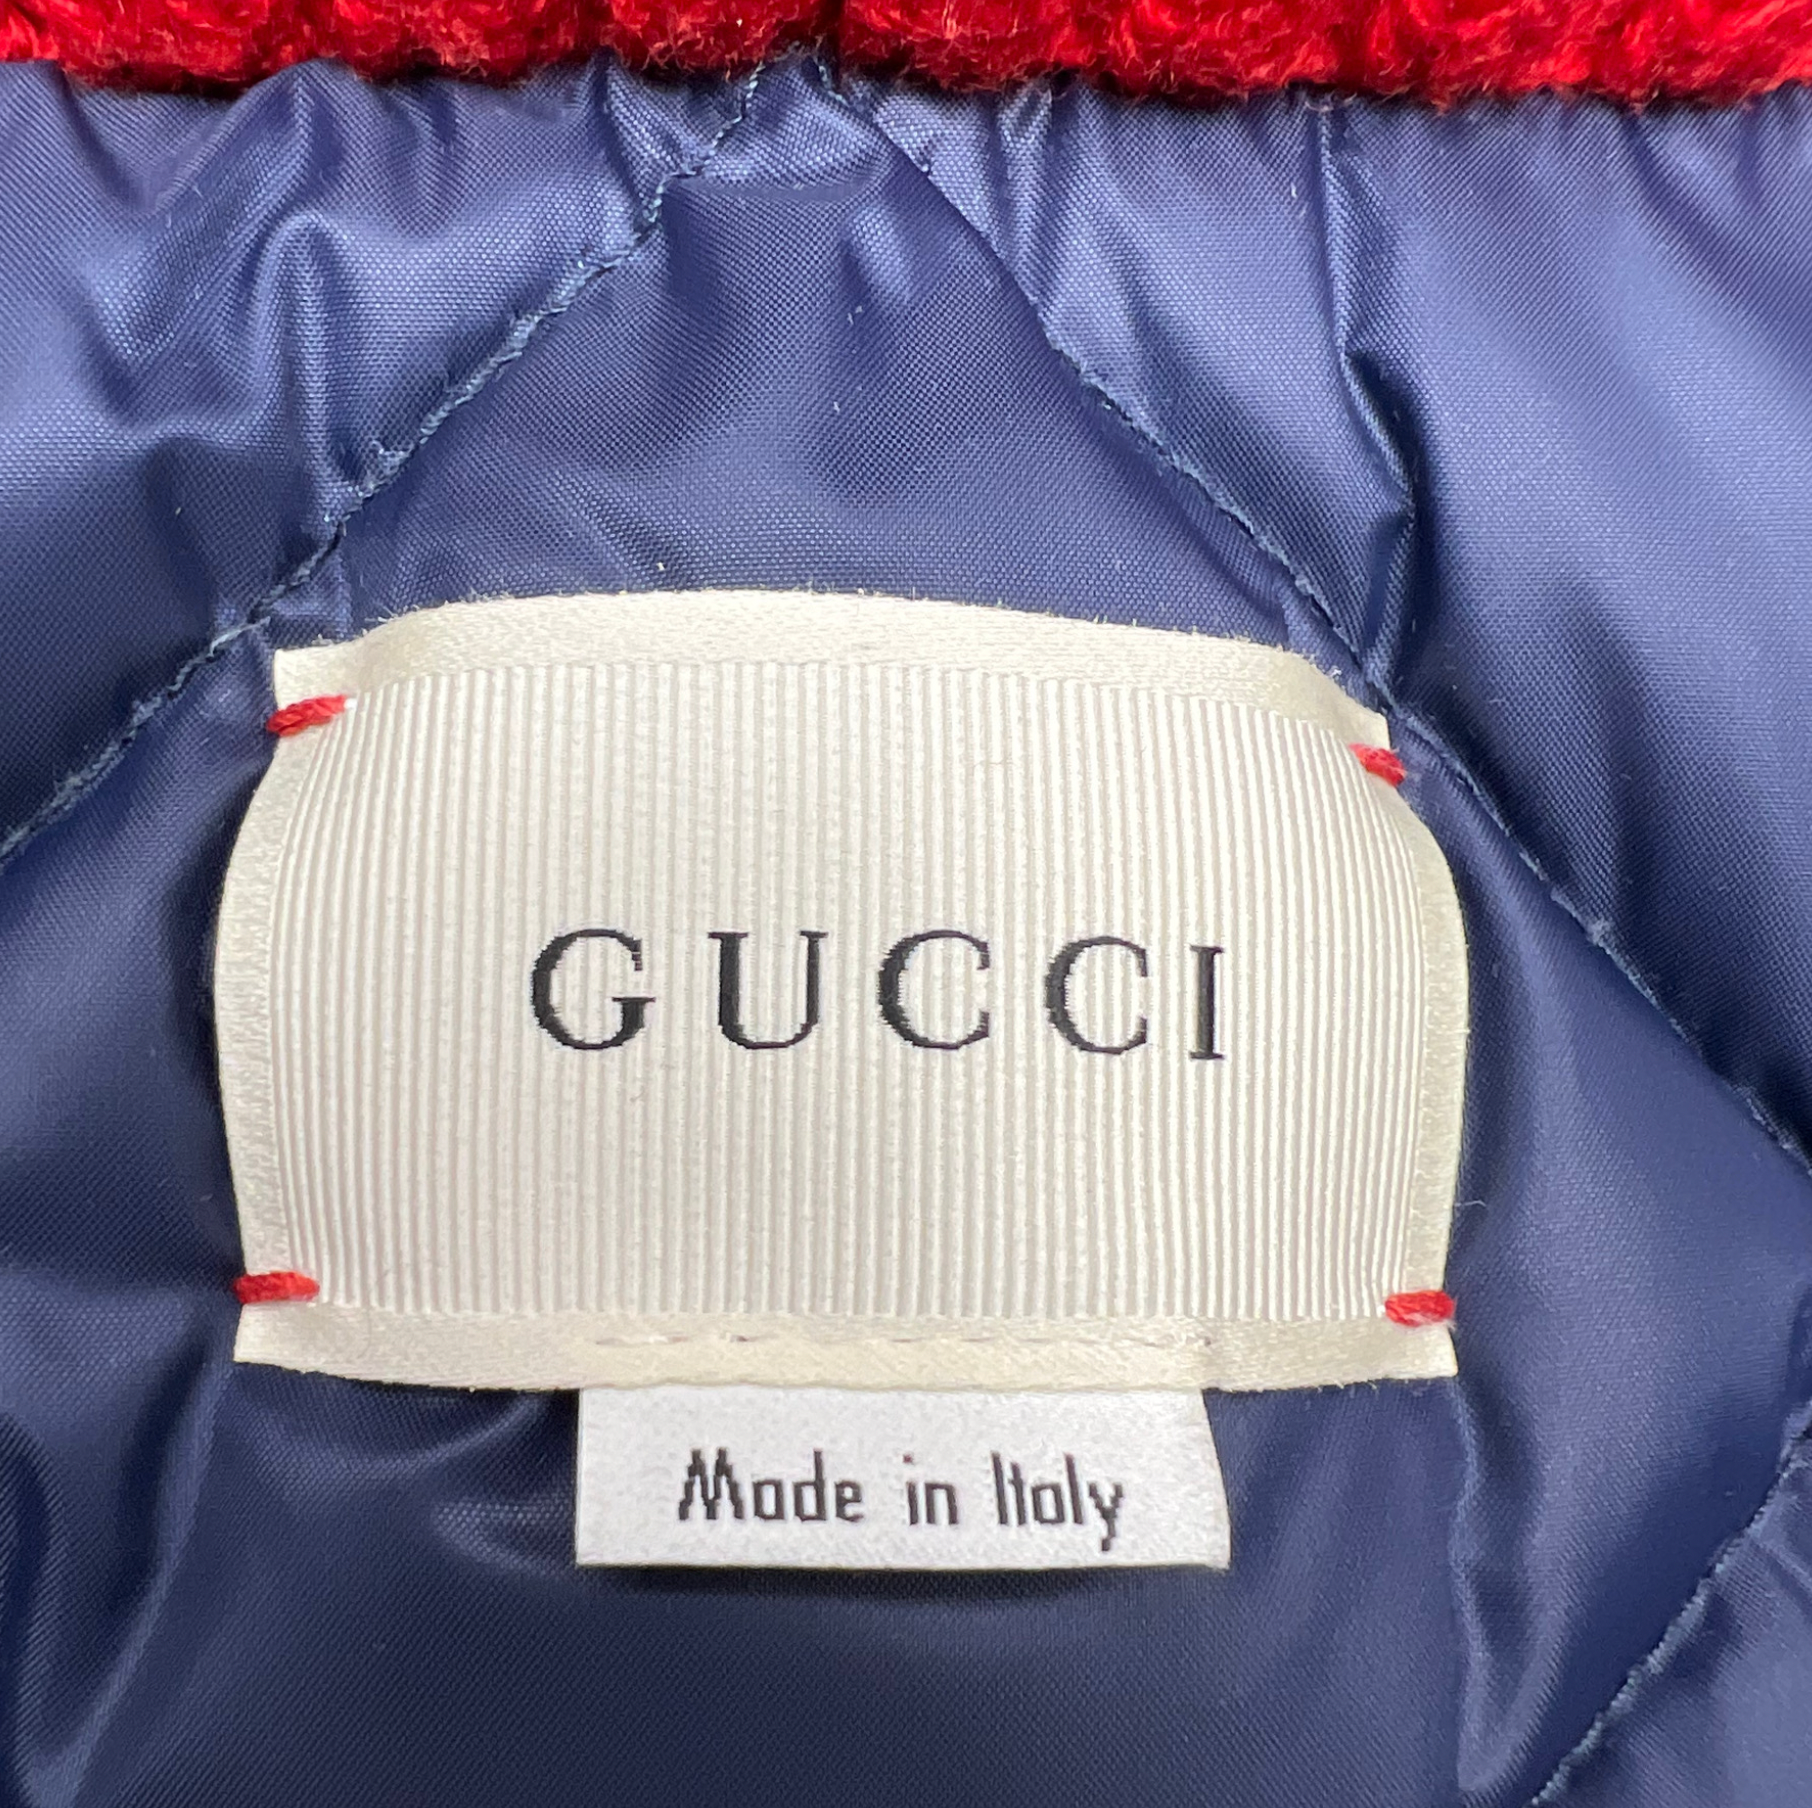 GUCCI - Khaki down jacket with bee logo - 8 years old